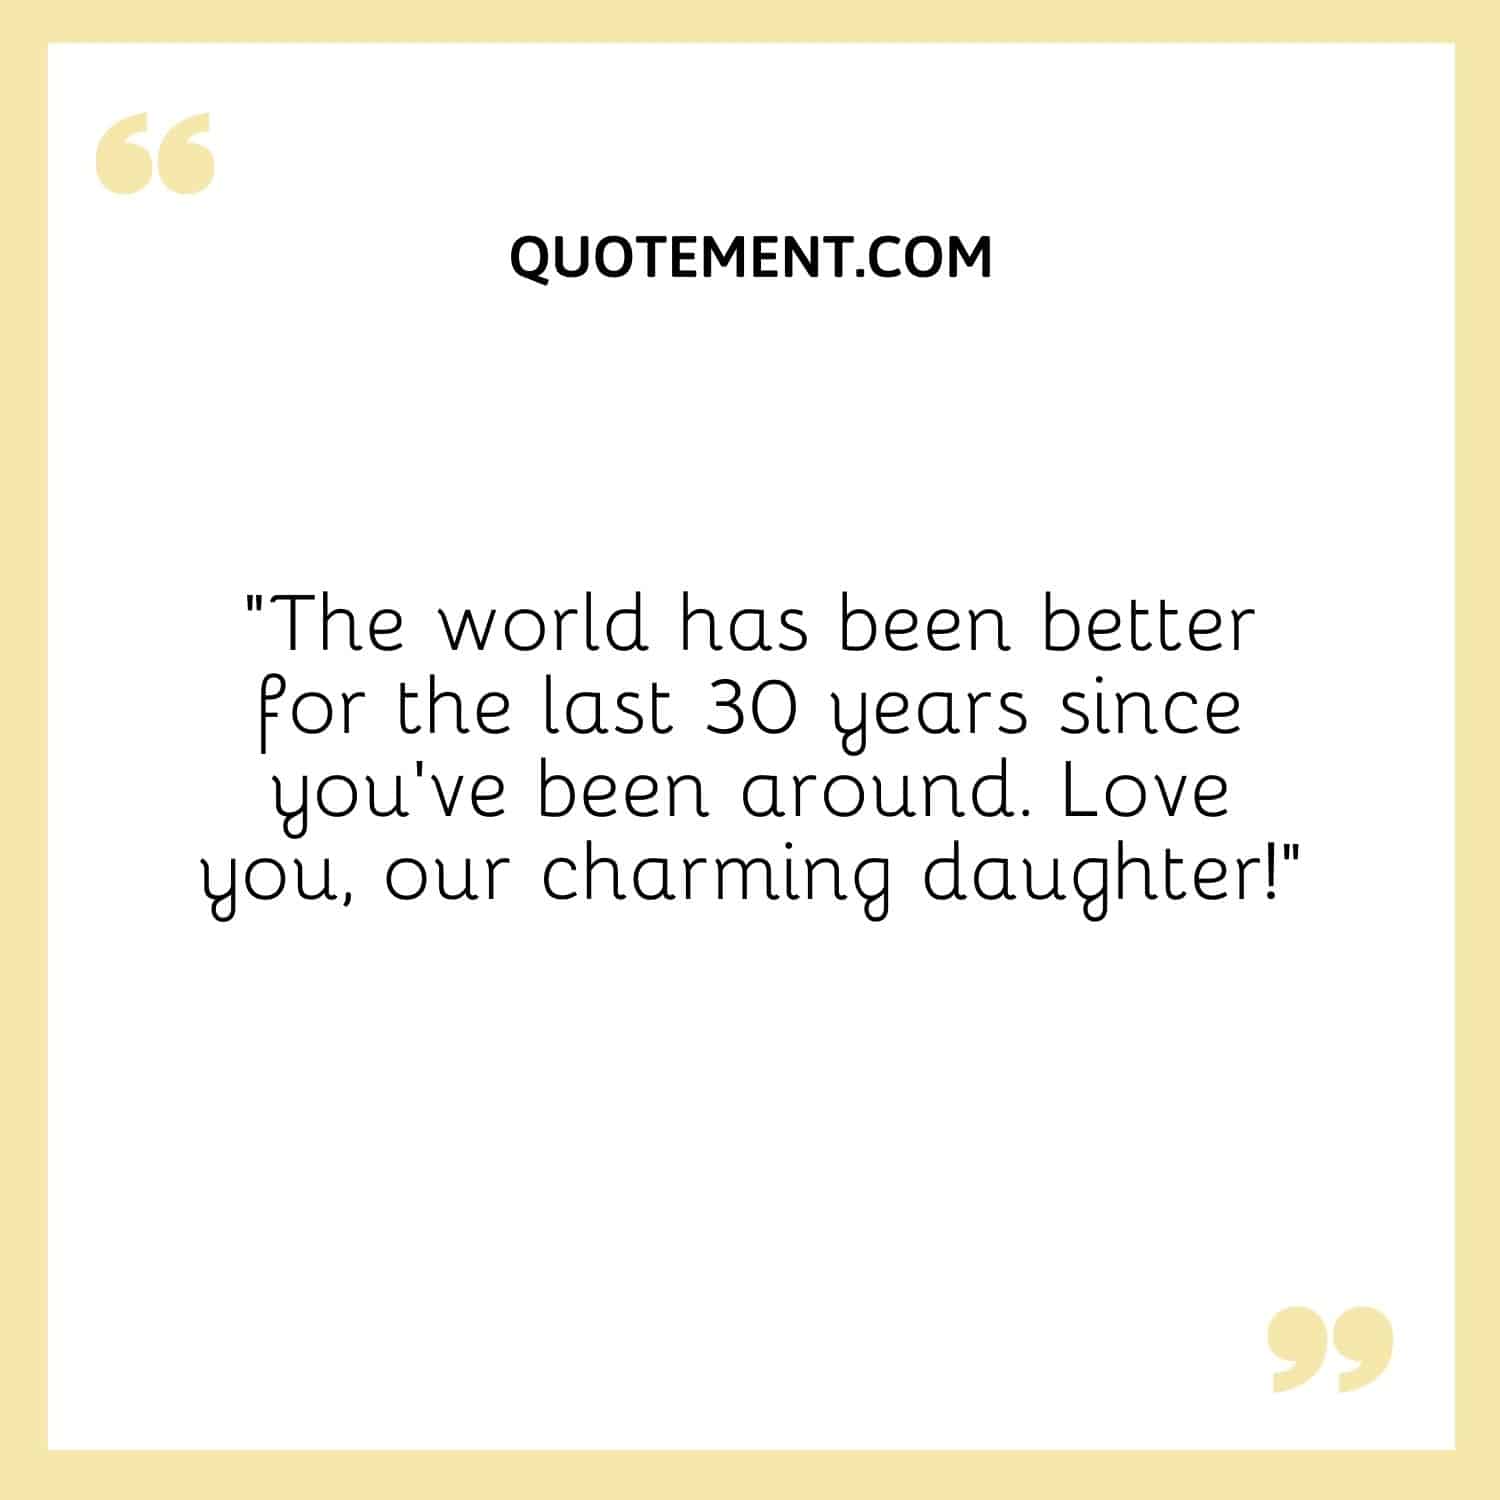 “The world has been better for the last 30 years since you’ve been around. Love you, our charming daughter!”